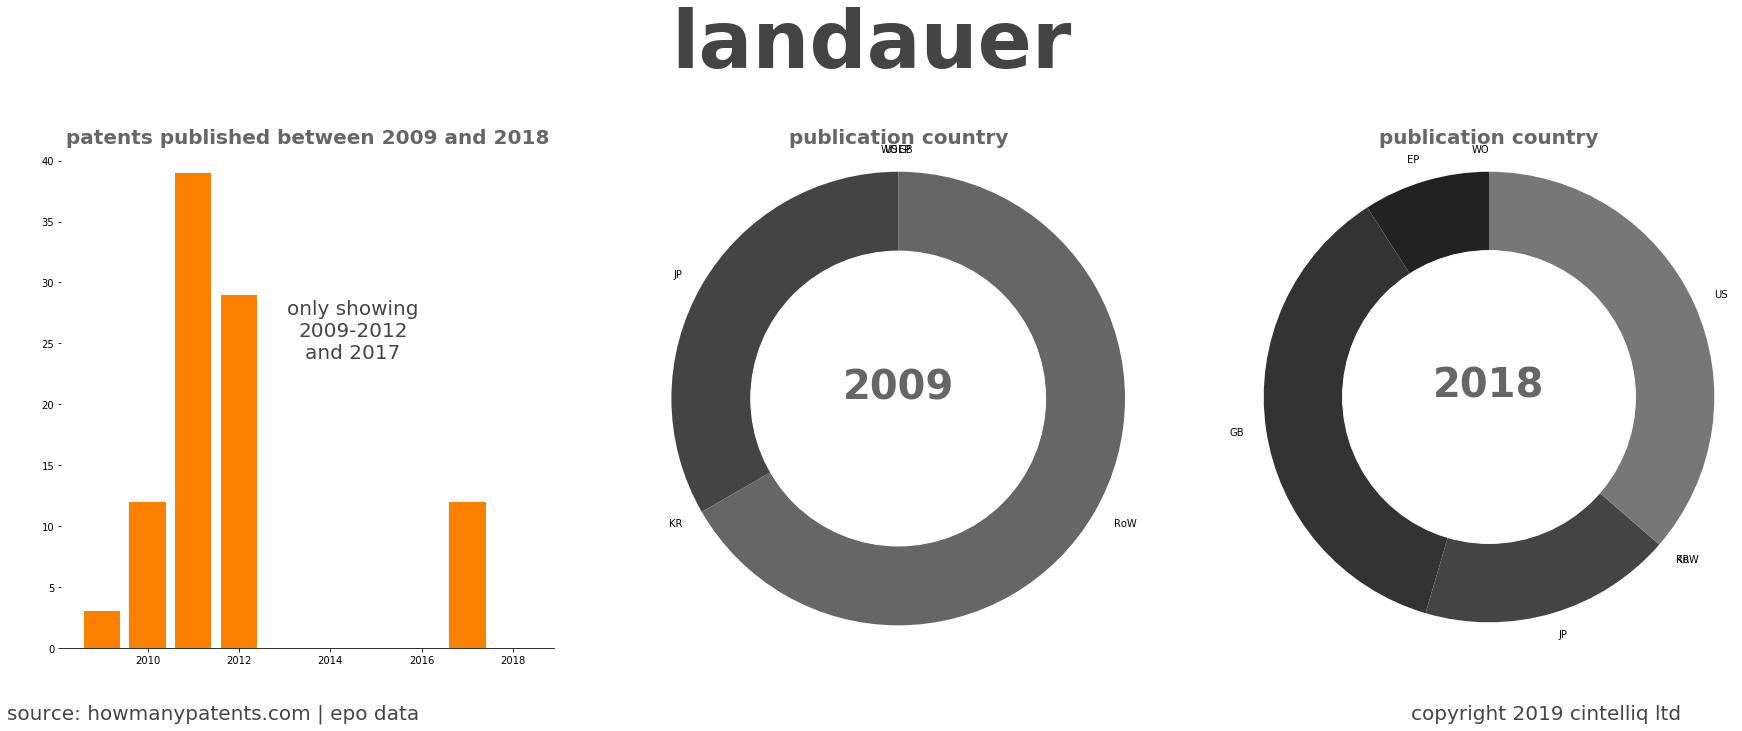 summary of patents for Landauer